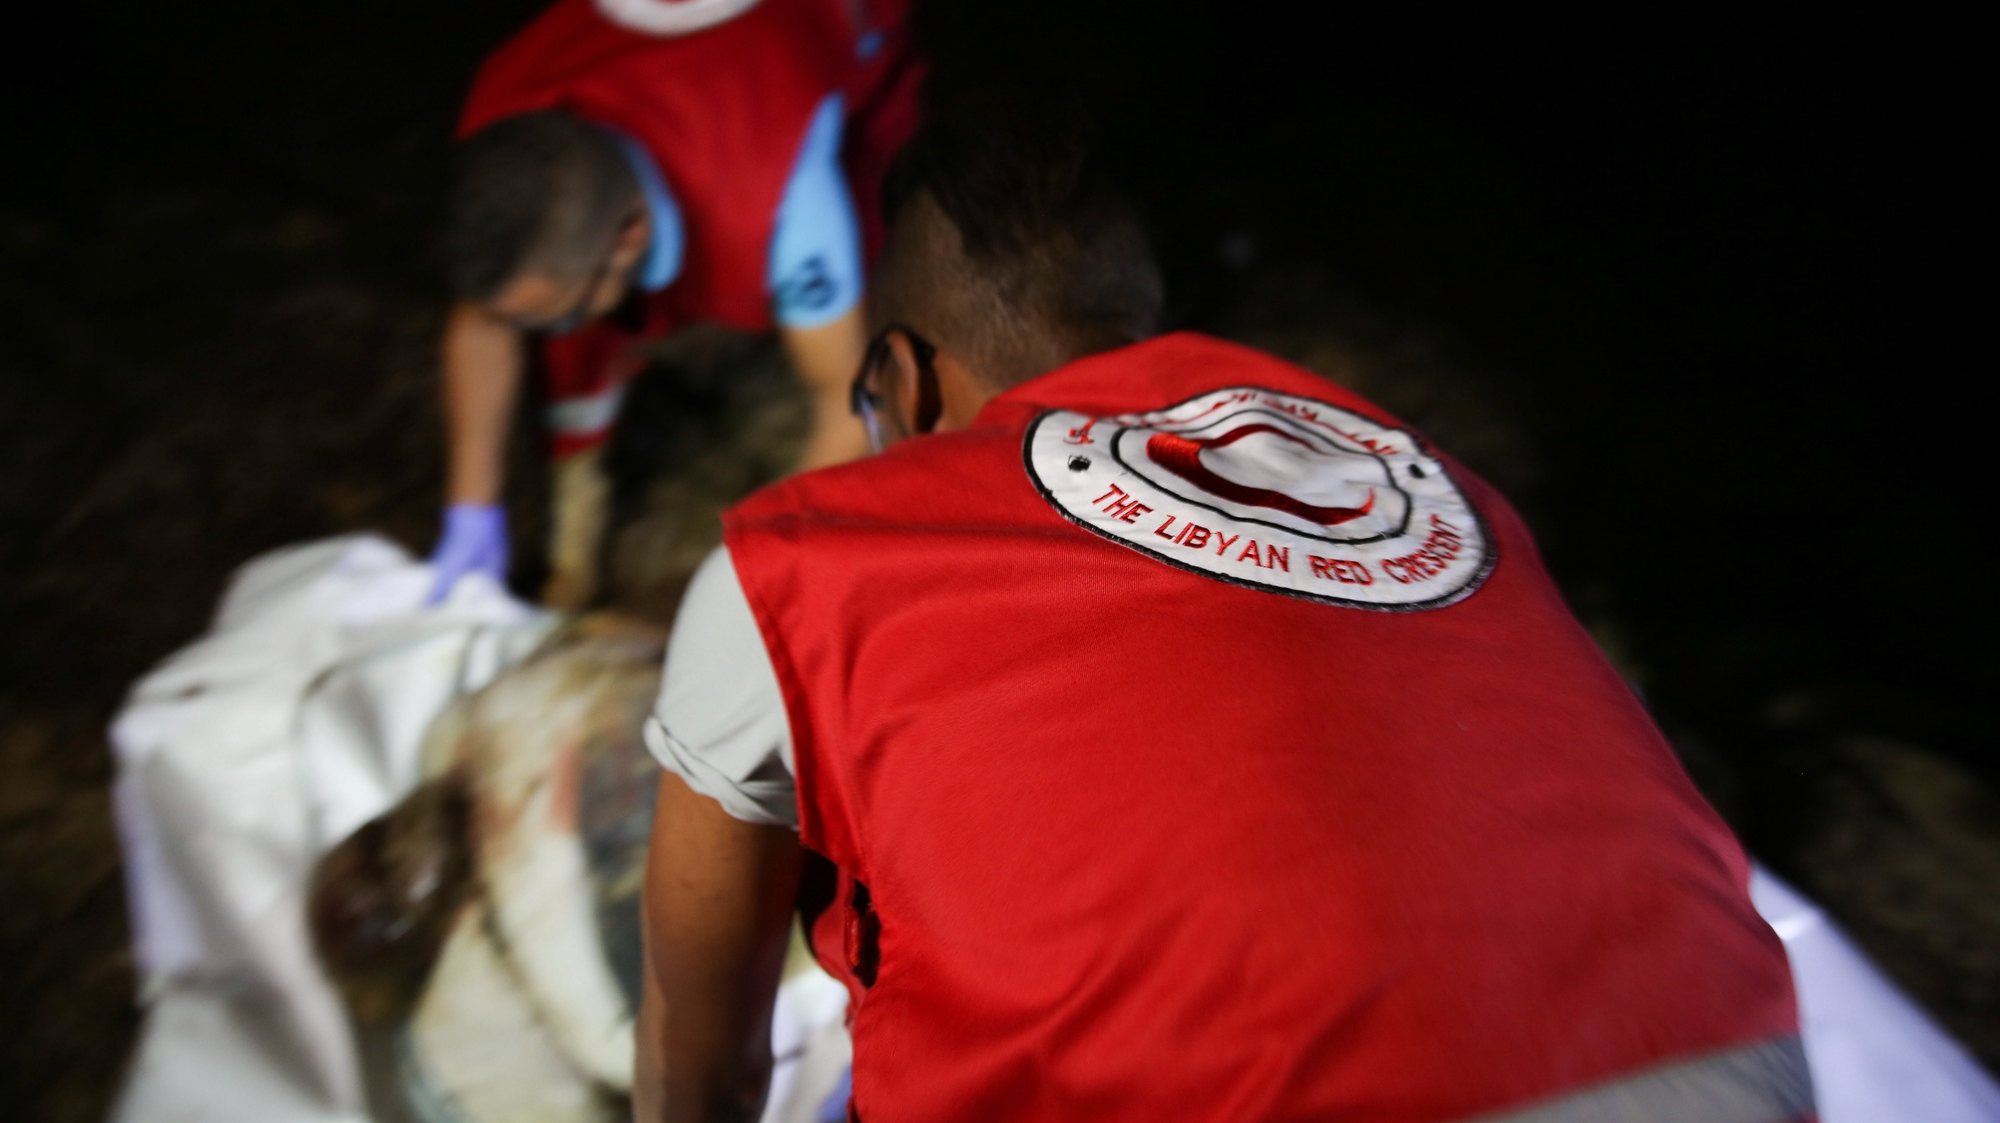 epa06860340 Libyan Red Crescent (LRC) rescue workers carry a body of a drowned migrant on a beach after being washed up, Tajoura, 14 kilometers east of Tripoli, Libya, 02 July 2018 (issued 03 July 2018). According to reports, Libyan rescuers found bodies of 17 drowned migrants over the past two days, after a migrant boat sank off the coast on 29 June with some 100 people missing in the incident.  EPA/STRINGER